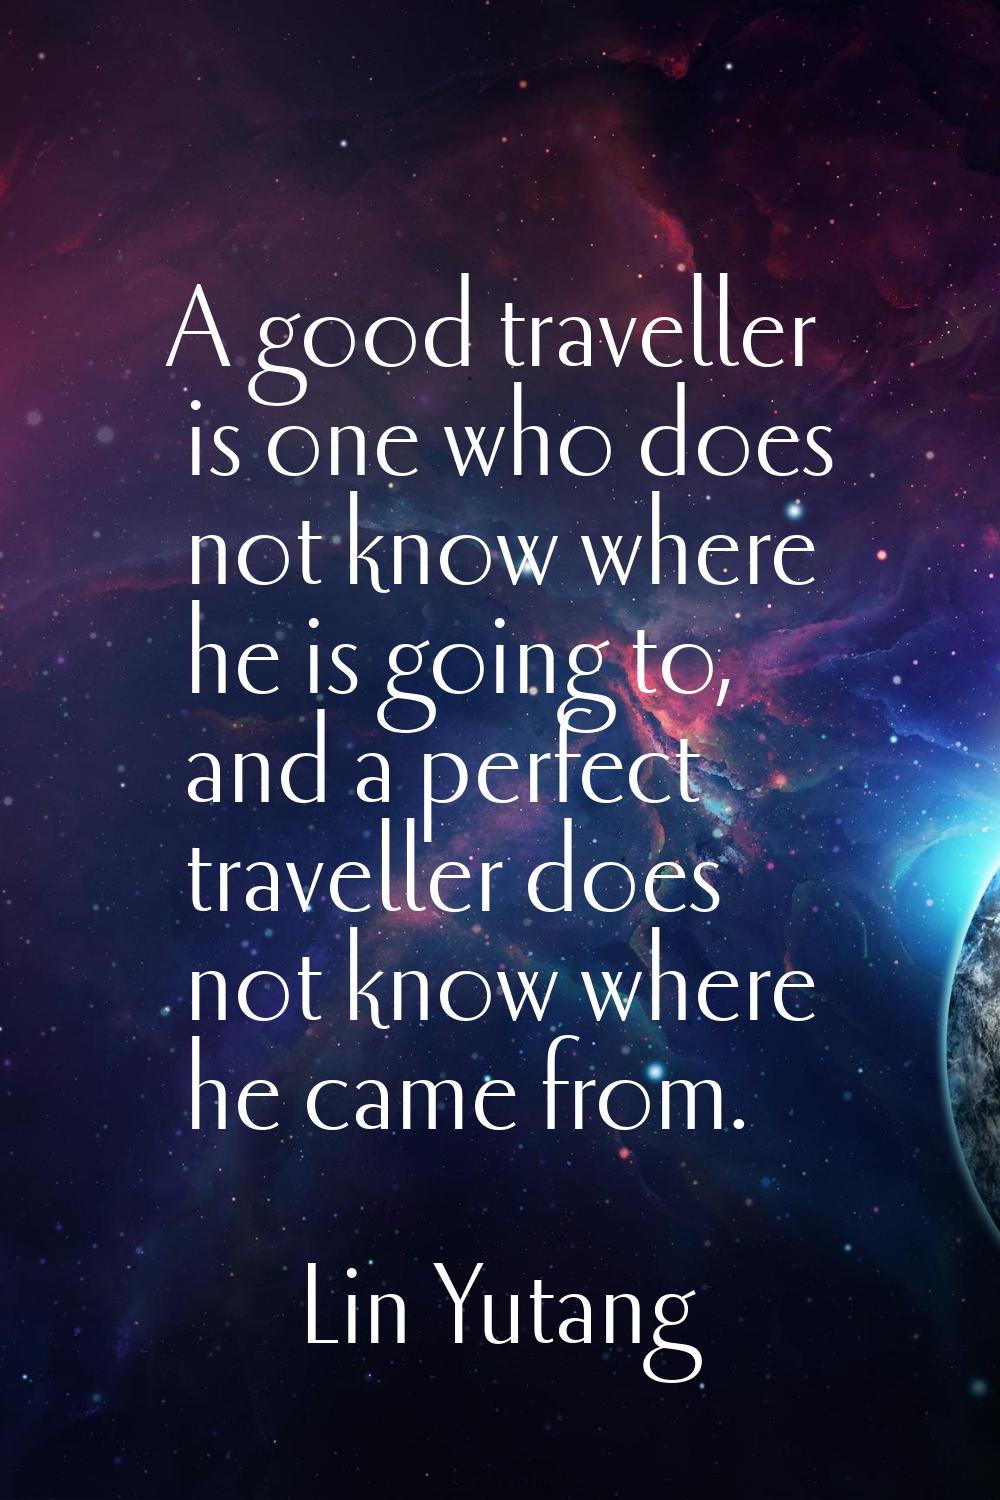 A good traveller is one who does not know where he is going to, and a perfect traveller does not kn